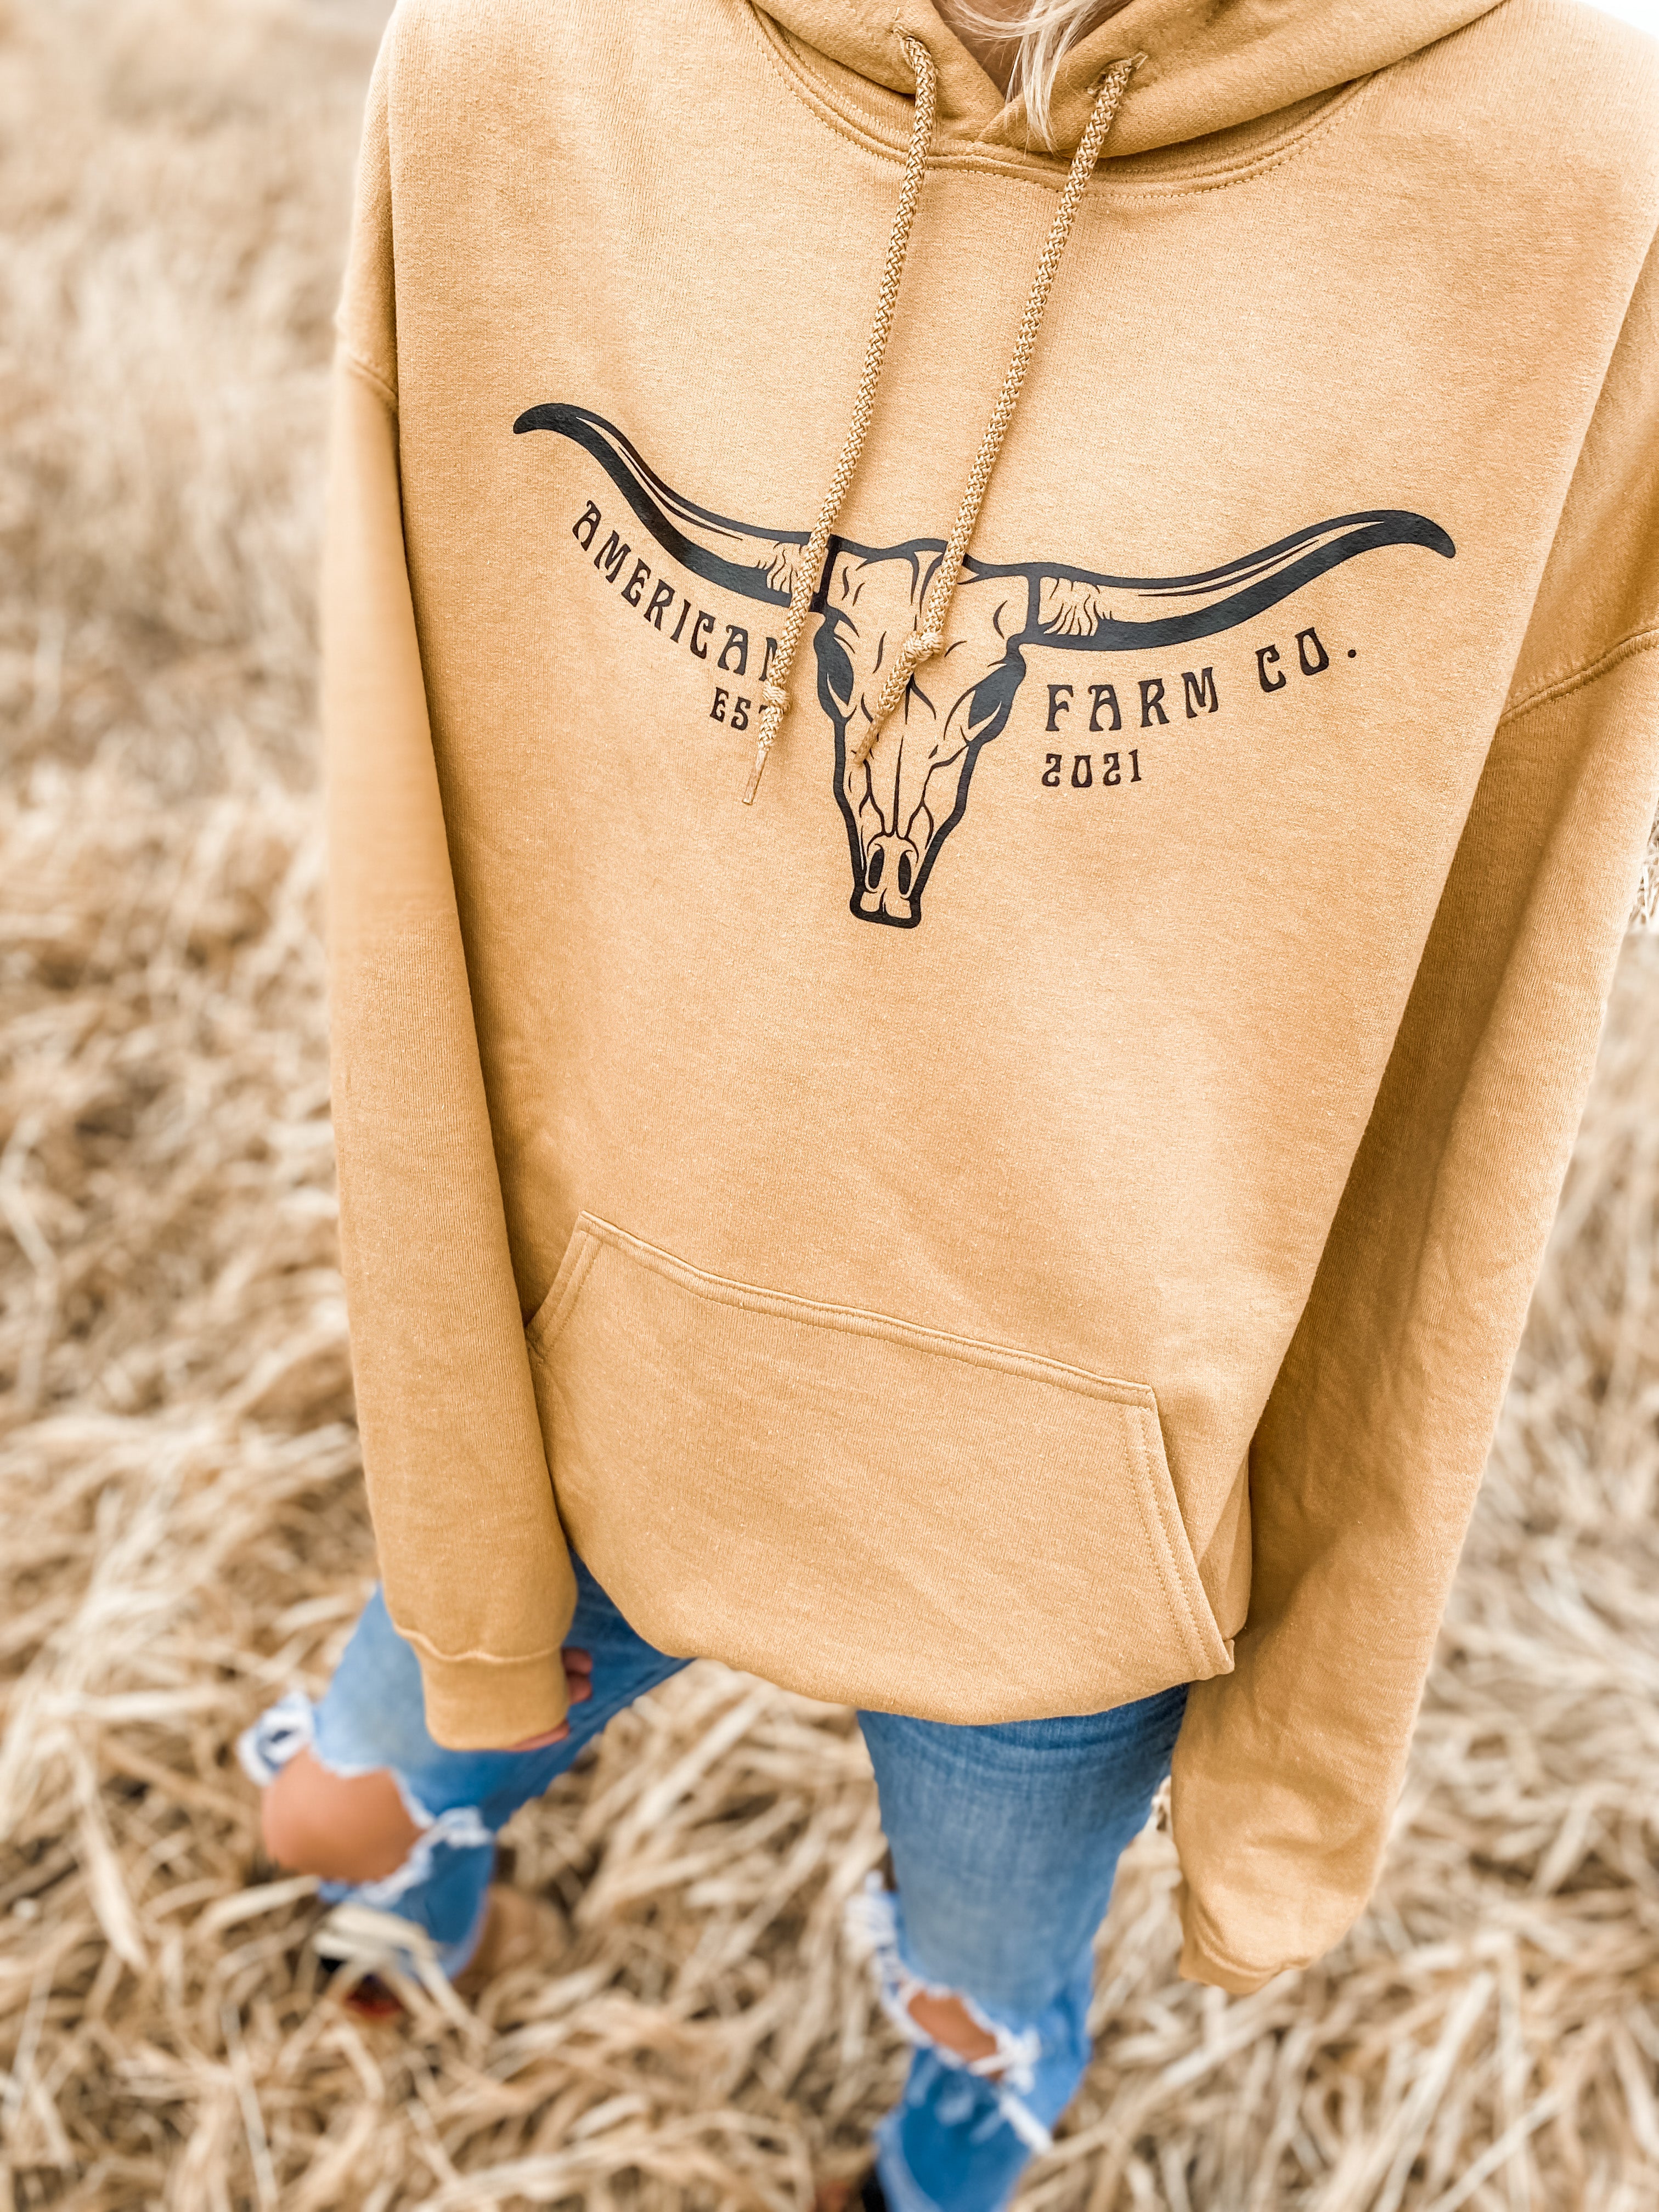 Front view of Skull Horn Hoodie worn by a woman paired with ripped jeans in the field